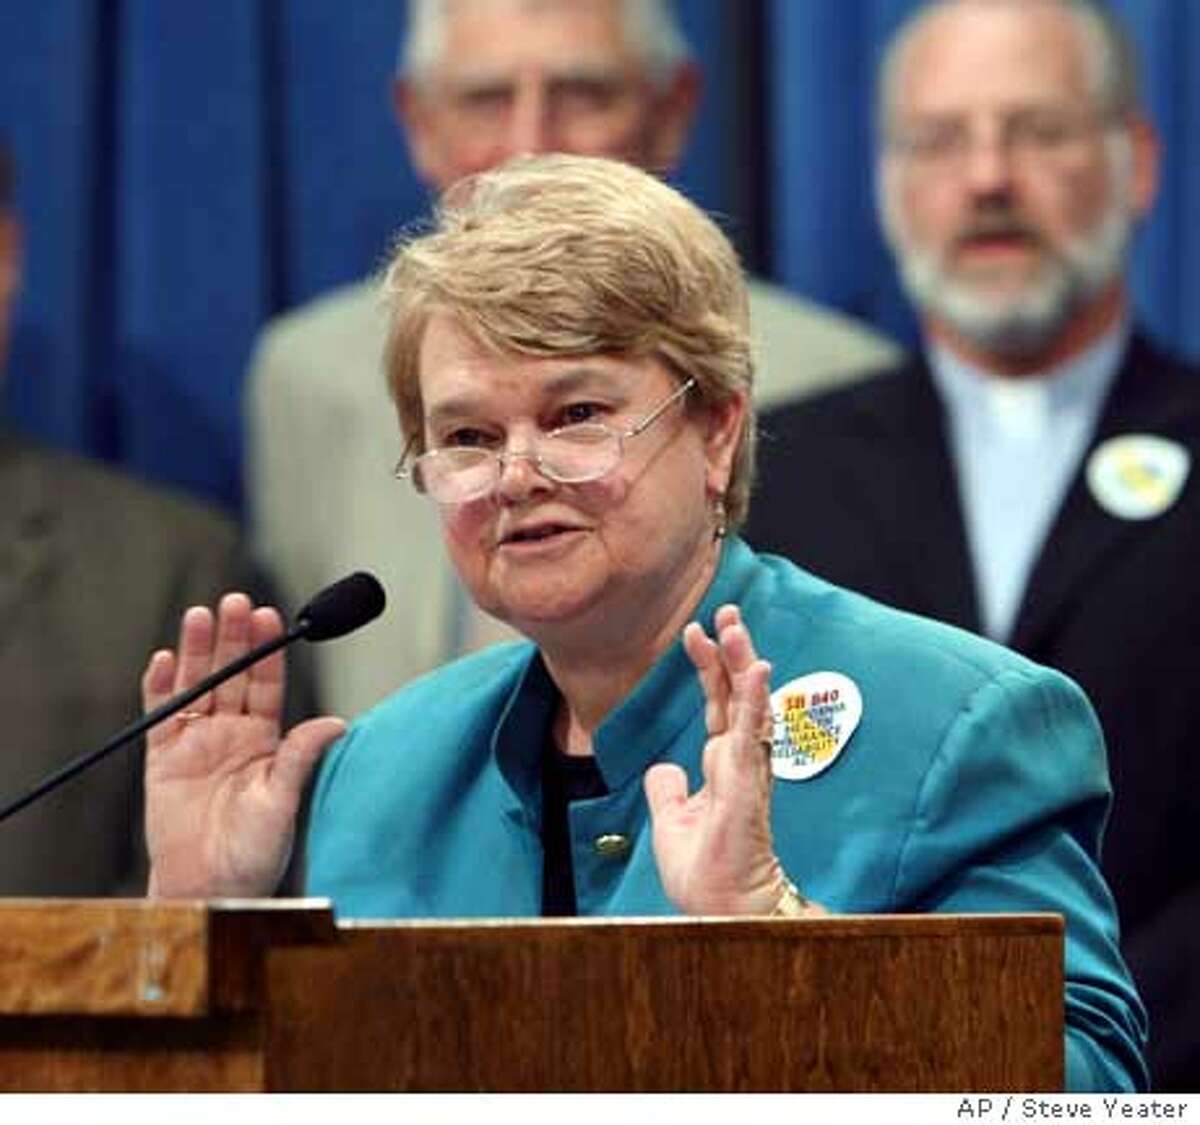 Sen. Sheila Kuehl, D-Santa Monica, talks about efforts to pass her universal health care bill SB 840 during a news conference at the Capitol in Sacramento, Calif., on Monday, Aug. 28, 2006. (AP Photo/Stee Yeater)